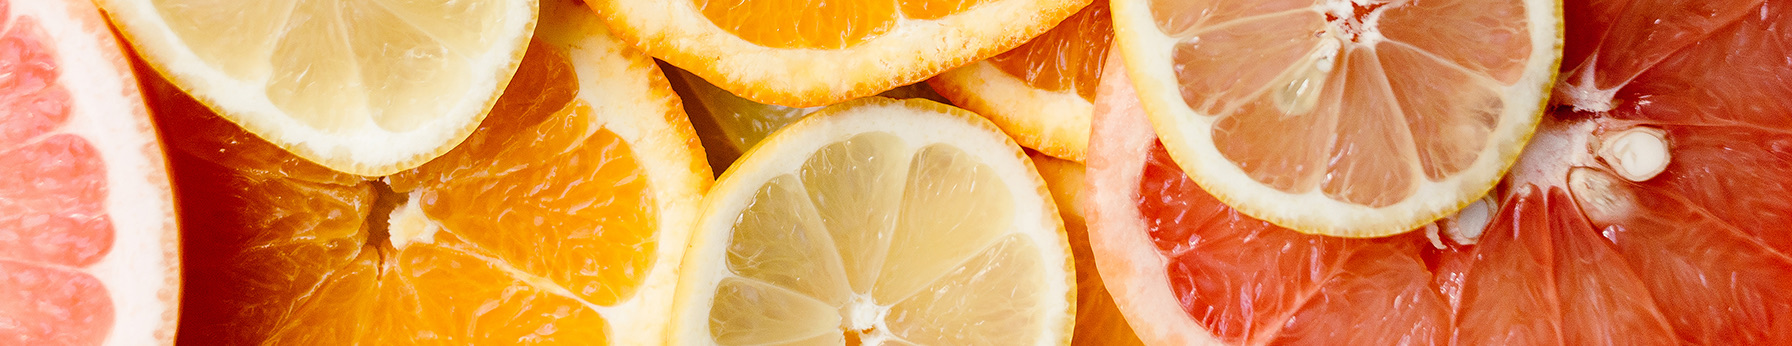 In the realm of perfumery, the term “citrus” encompasses a broad array of scents derived from hesperidic fruits, named after the Hesperides, nymphs of Greek mythology. This category includes not only the fruit themselves but also citrus-scented raw materials like verbena and lemongrass, making it one of the most historically significant groups of ingredients in the art of fragrance, alongside the venerable resins. Recent additions to this olfactory family, such as pomelo, grapefruit, yuzu, and hassaku, represent modern expansions in the variety of citrus scents available for perfumers to incorporate into their creations. www.perfumestars.com